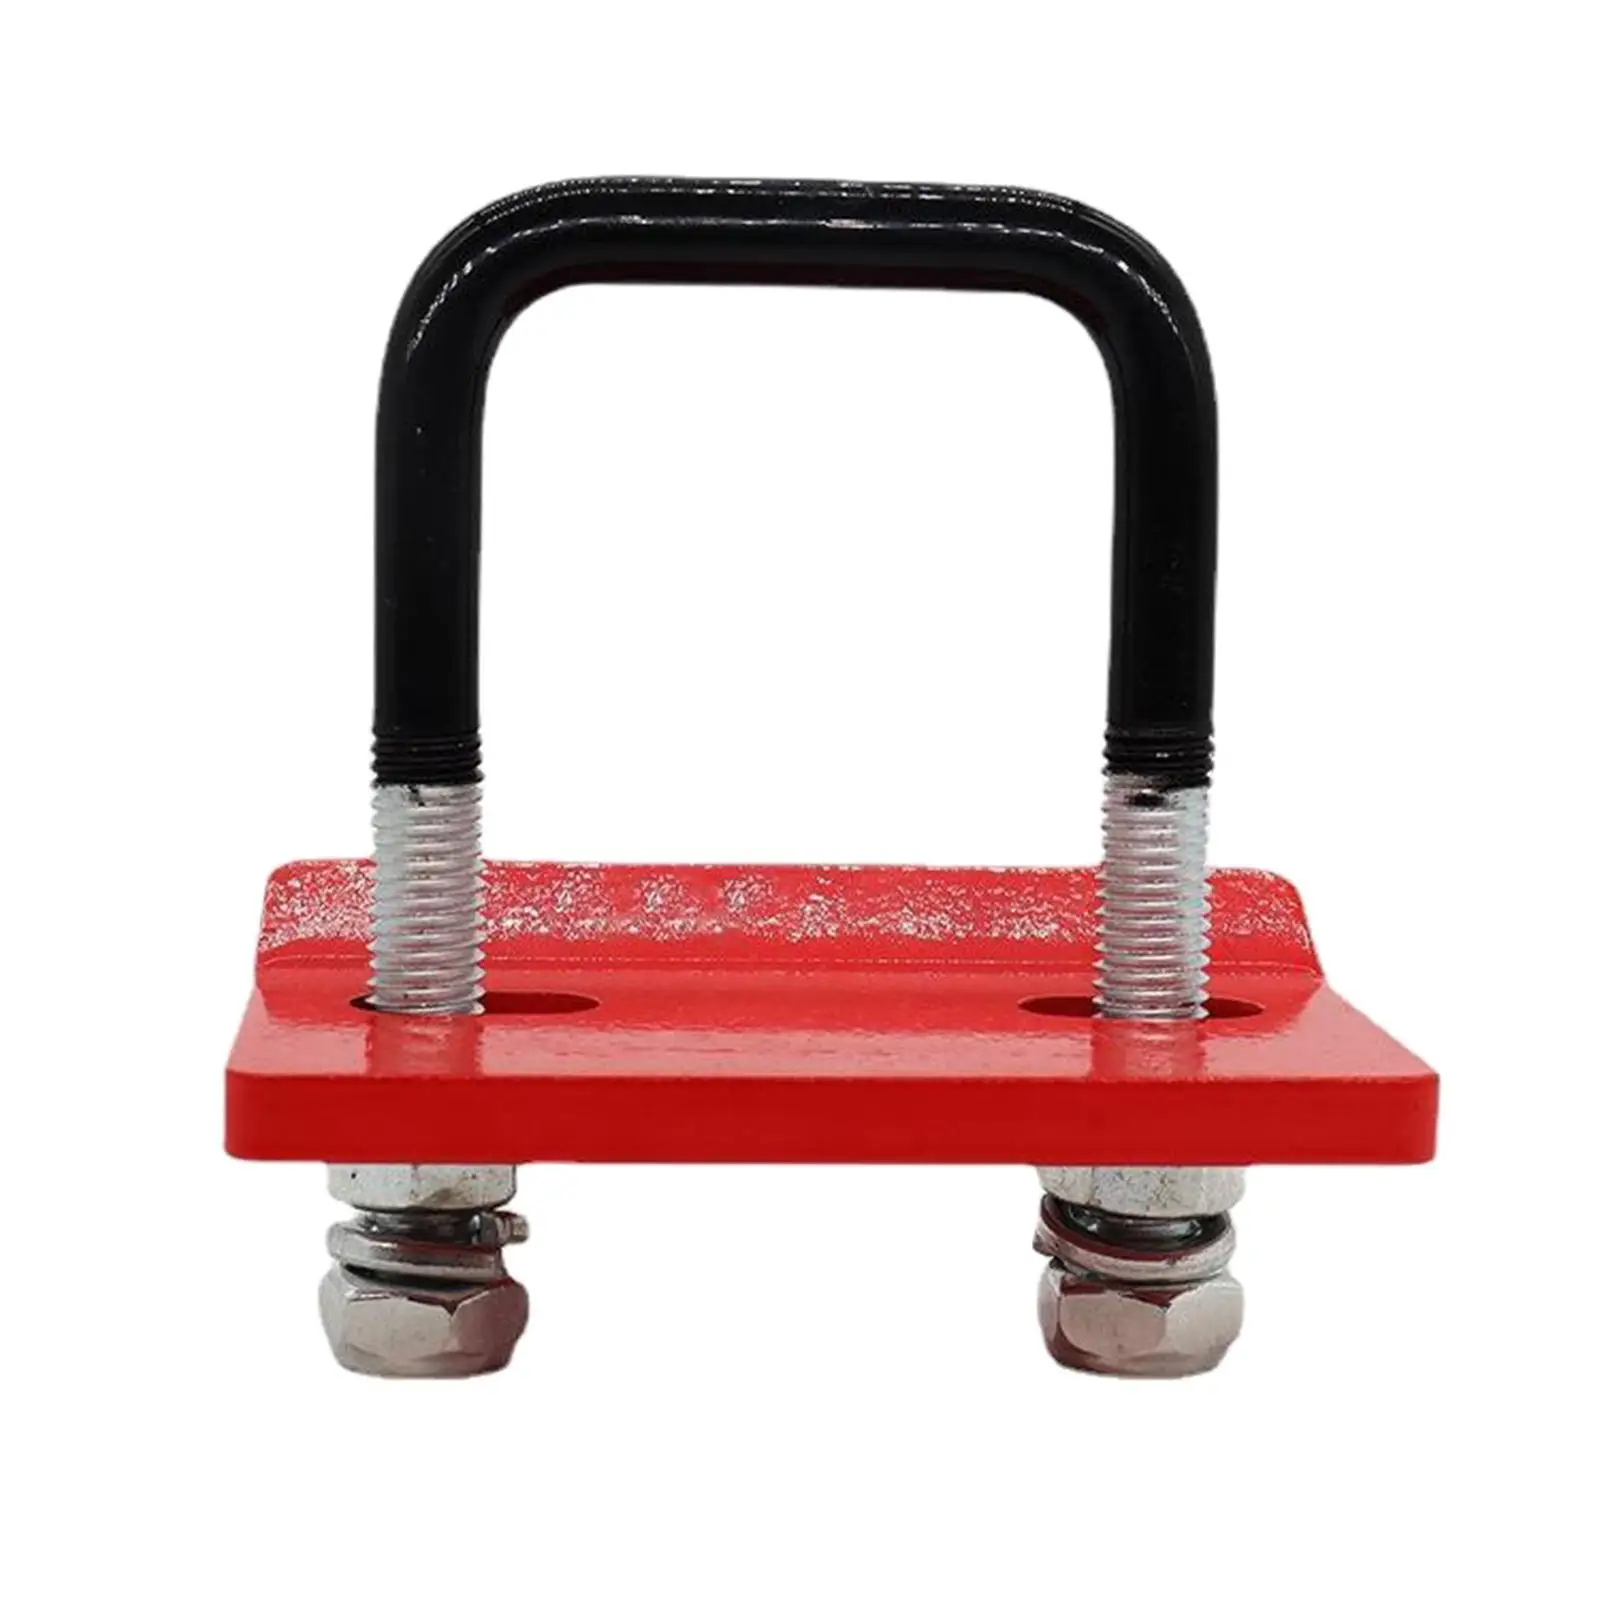 Hitch Tightener Heavy Duty Anti Rattle Stabilizer for 2 Inch Hitch, Rubber